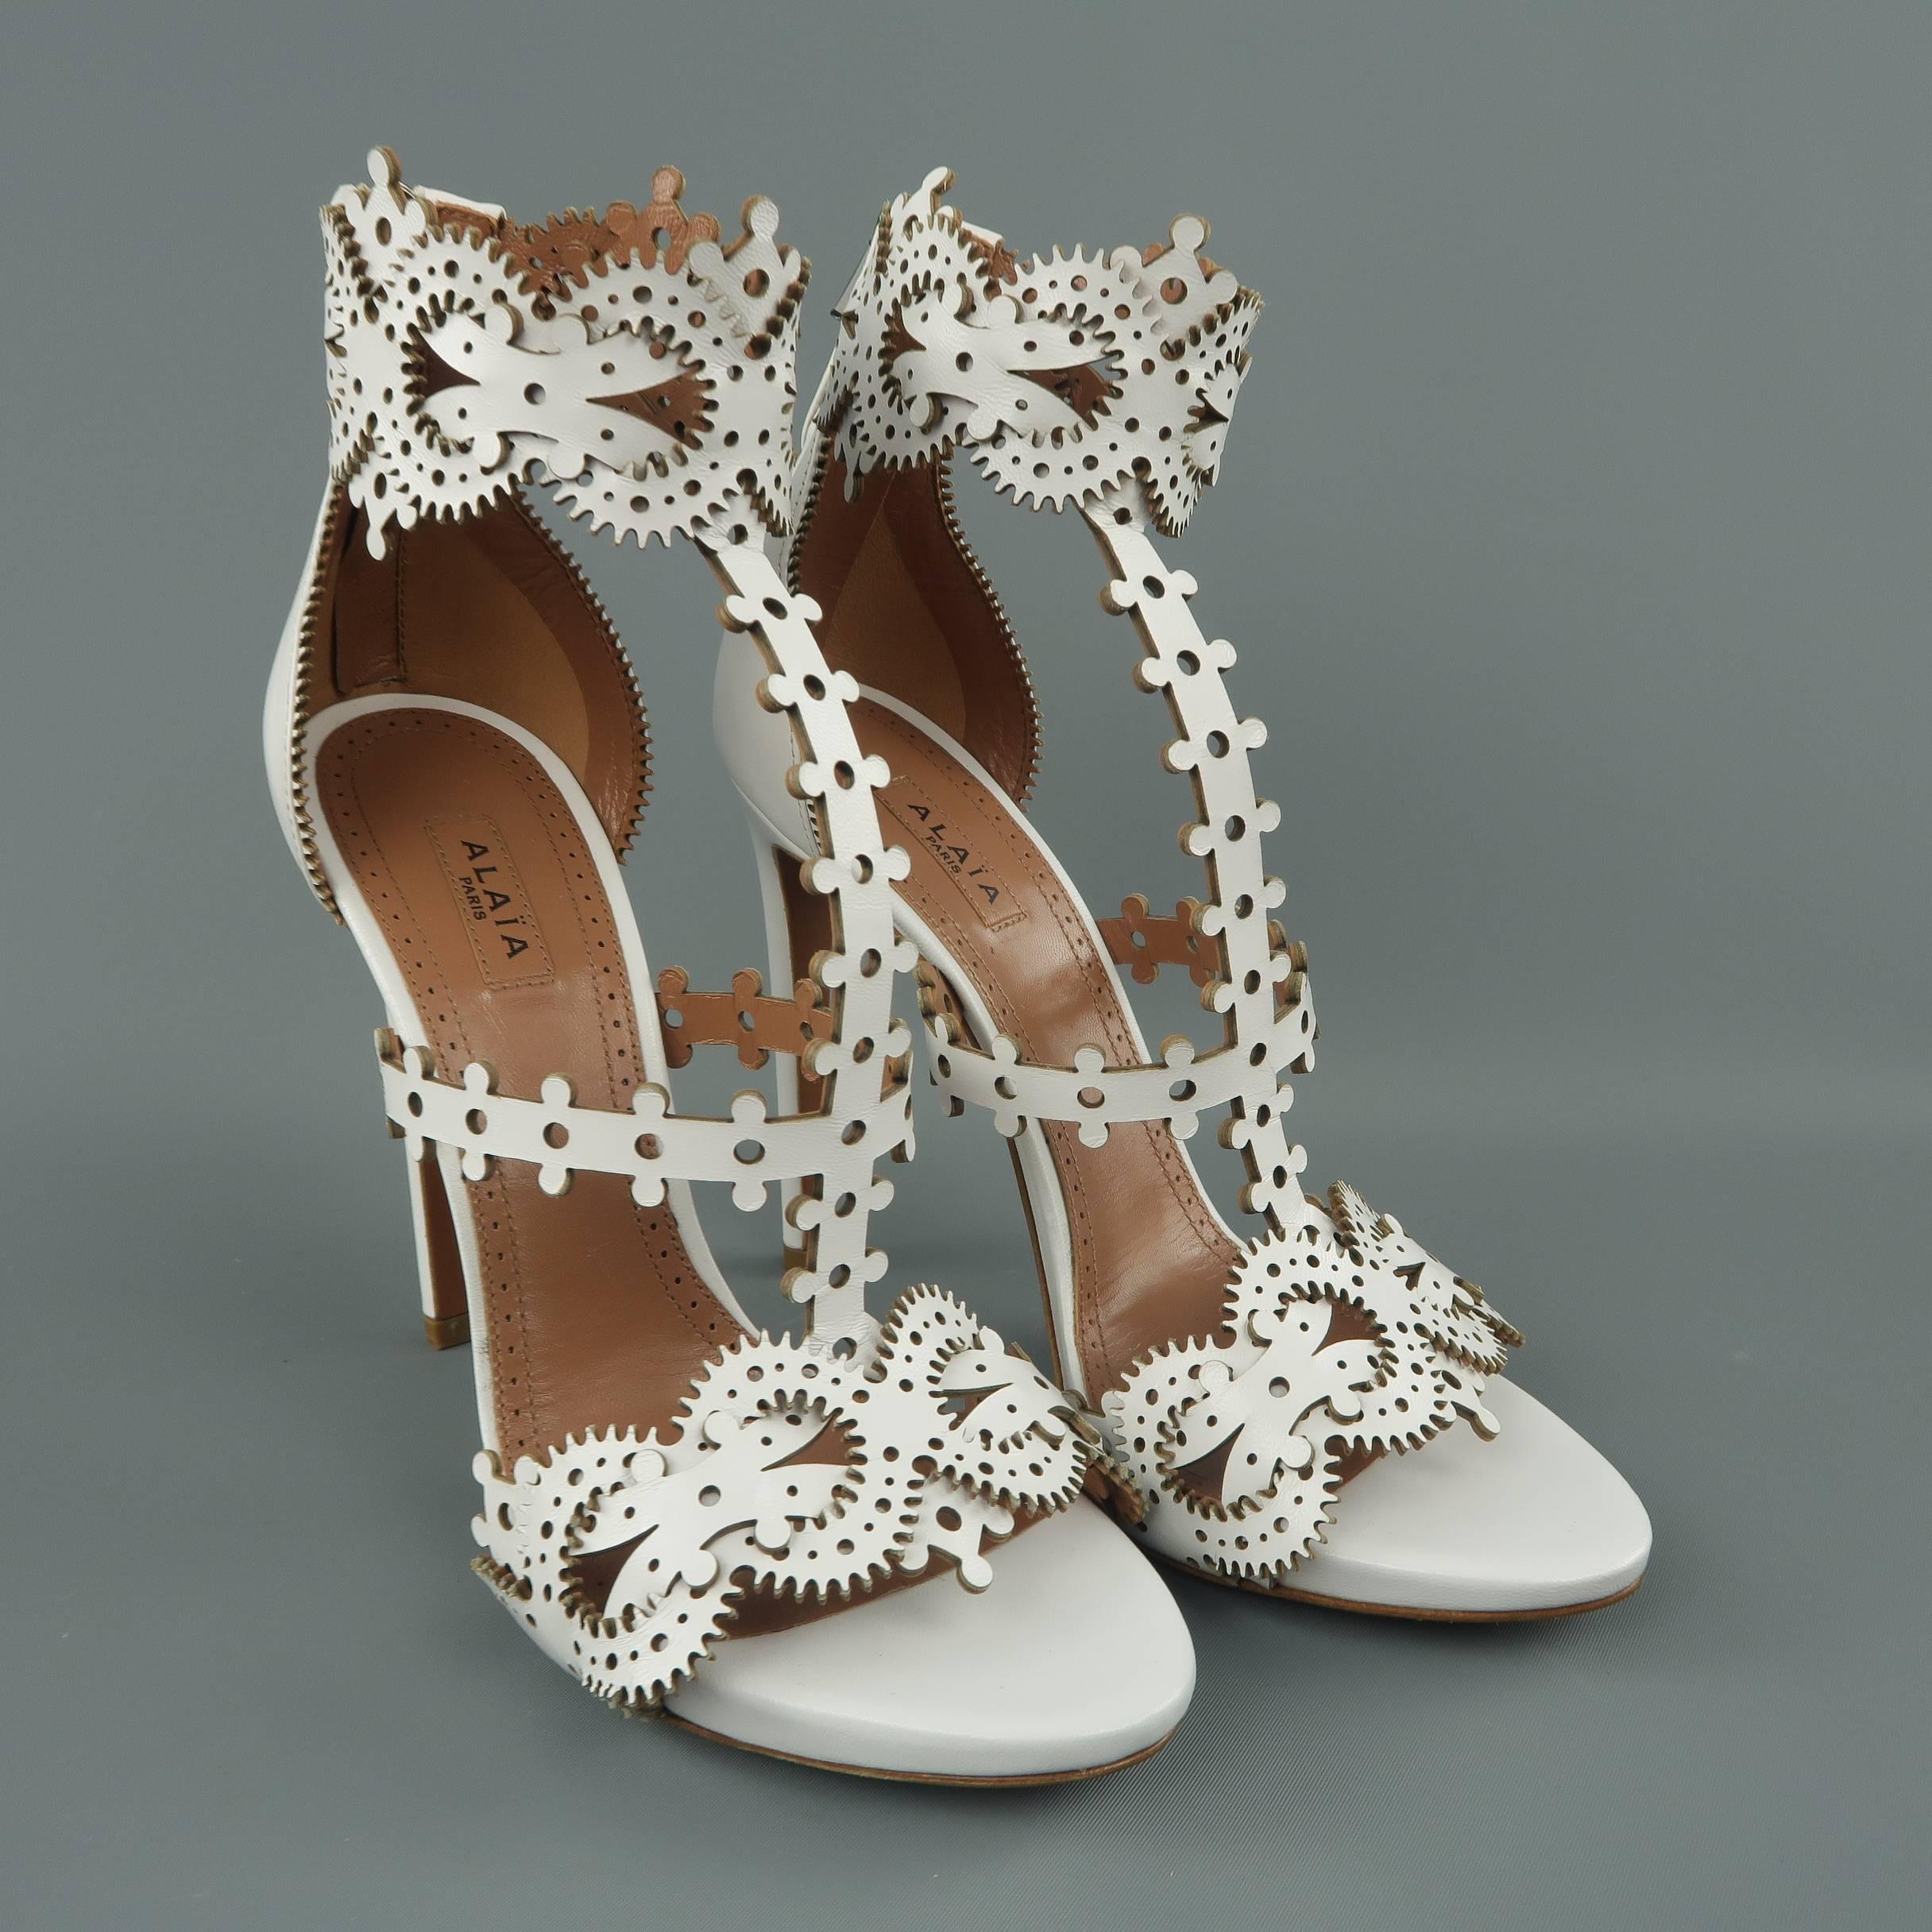 ALAIA sandals come in white leather with laser cut pattern straps and a covered stiletto heel. Made in Italy.
 
Brand New.
Marked: IT 38.5
 
Heel: 4.5 in.
